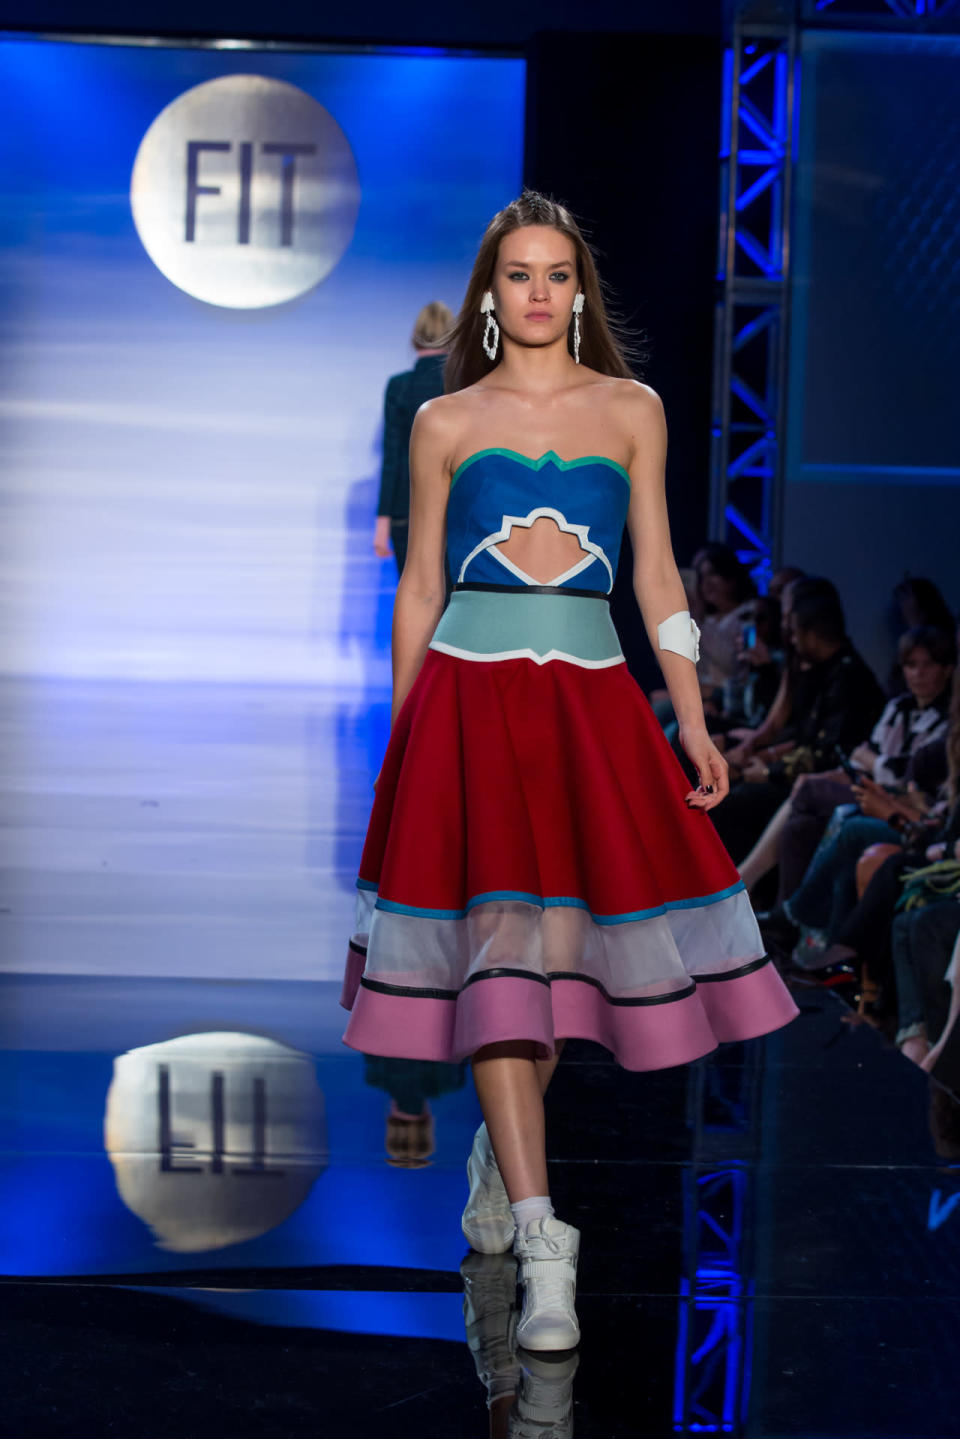 FIT graduate Namibia Viera Martinez won the show’s Critic’s Choice Award for her clever use of cutouts and color blocking.